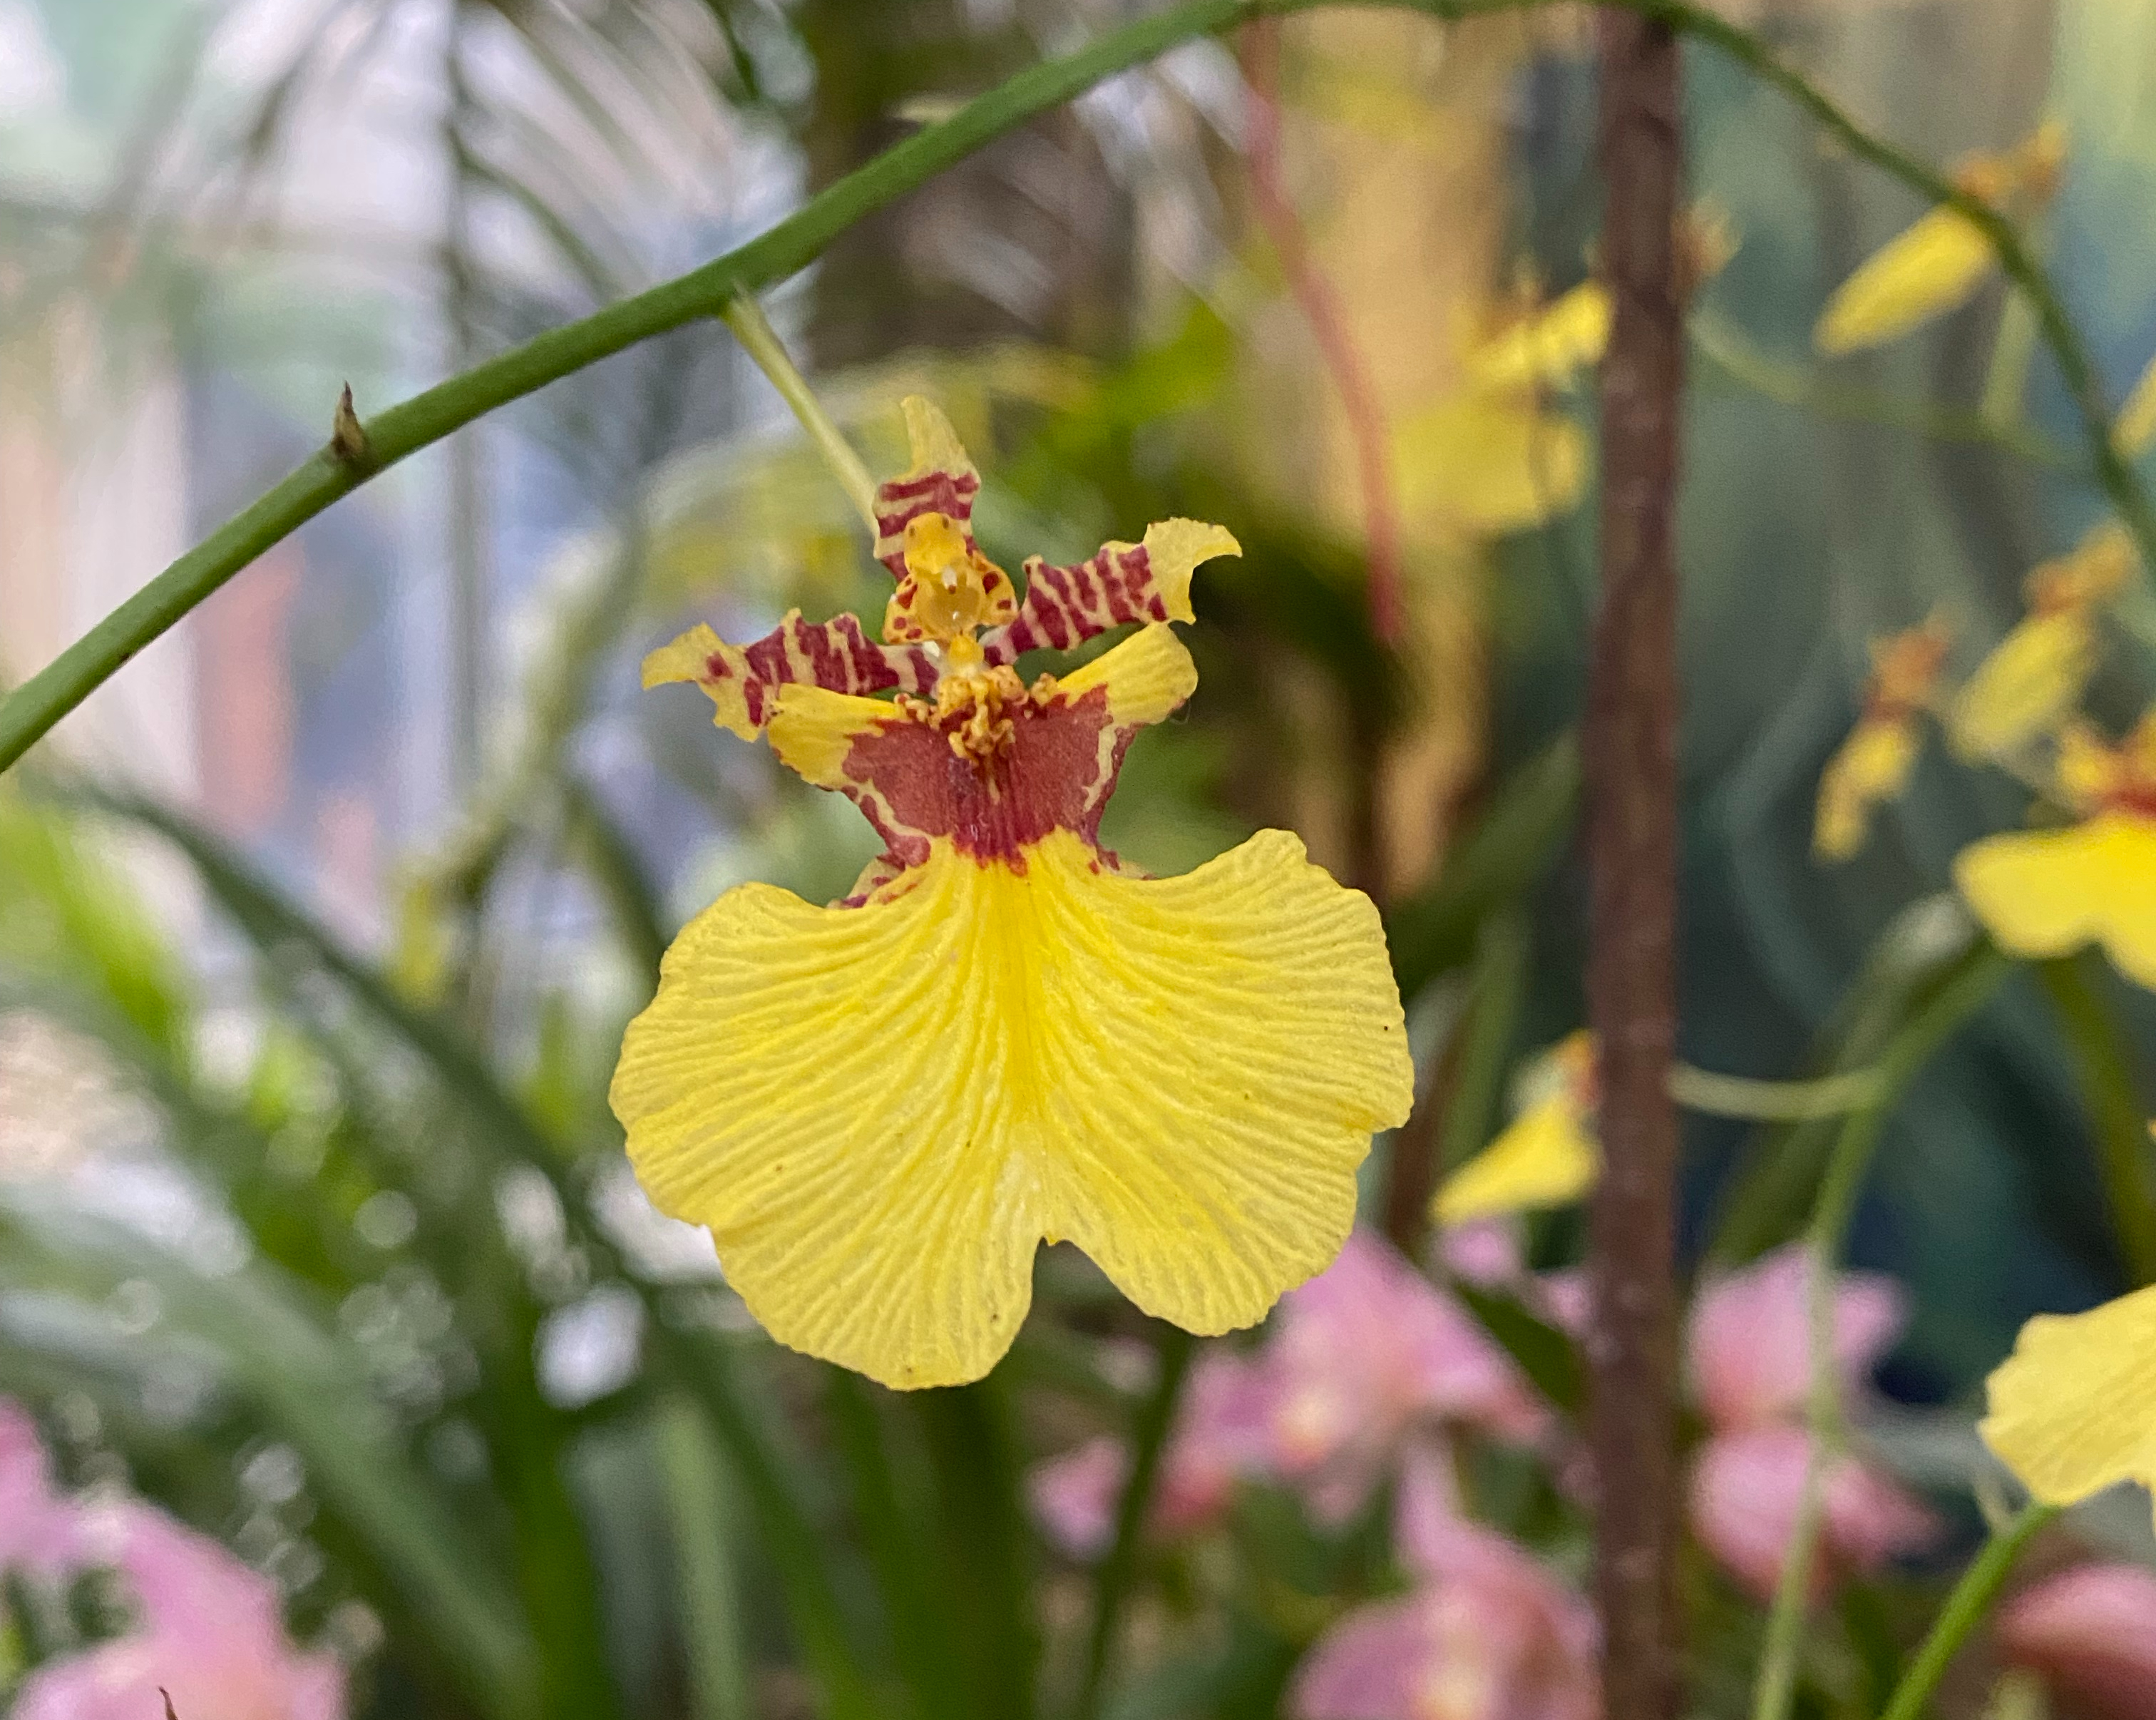 A yellow orchid flower